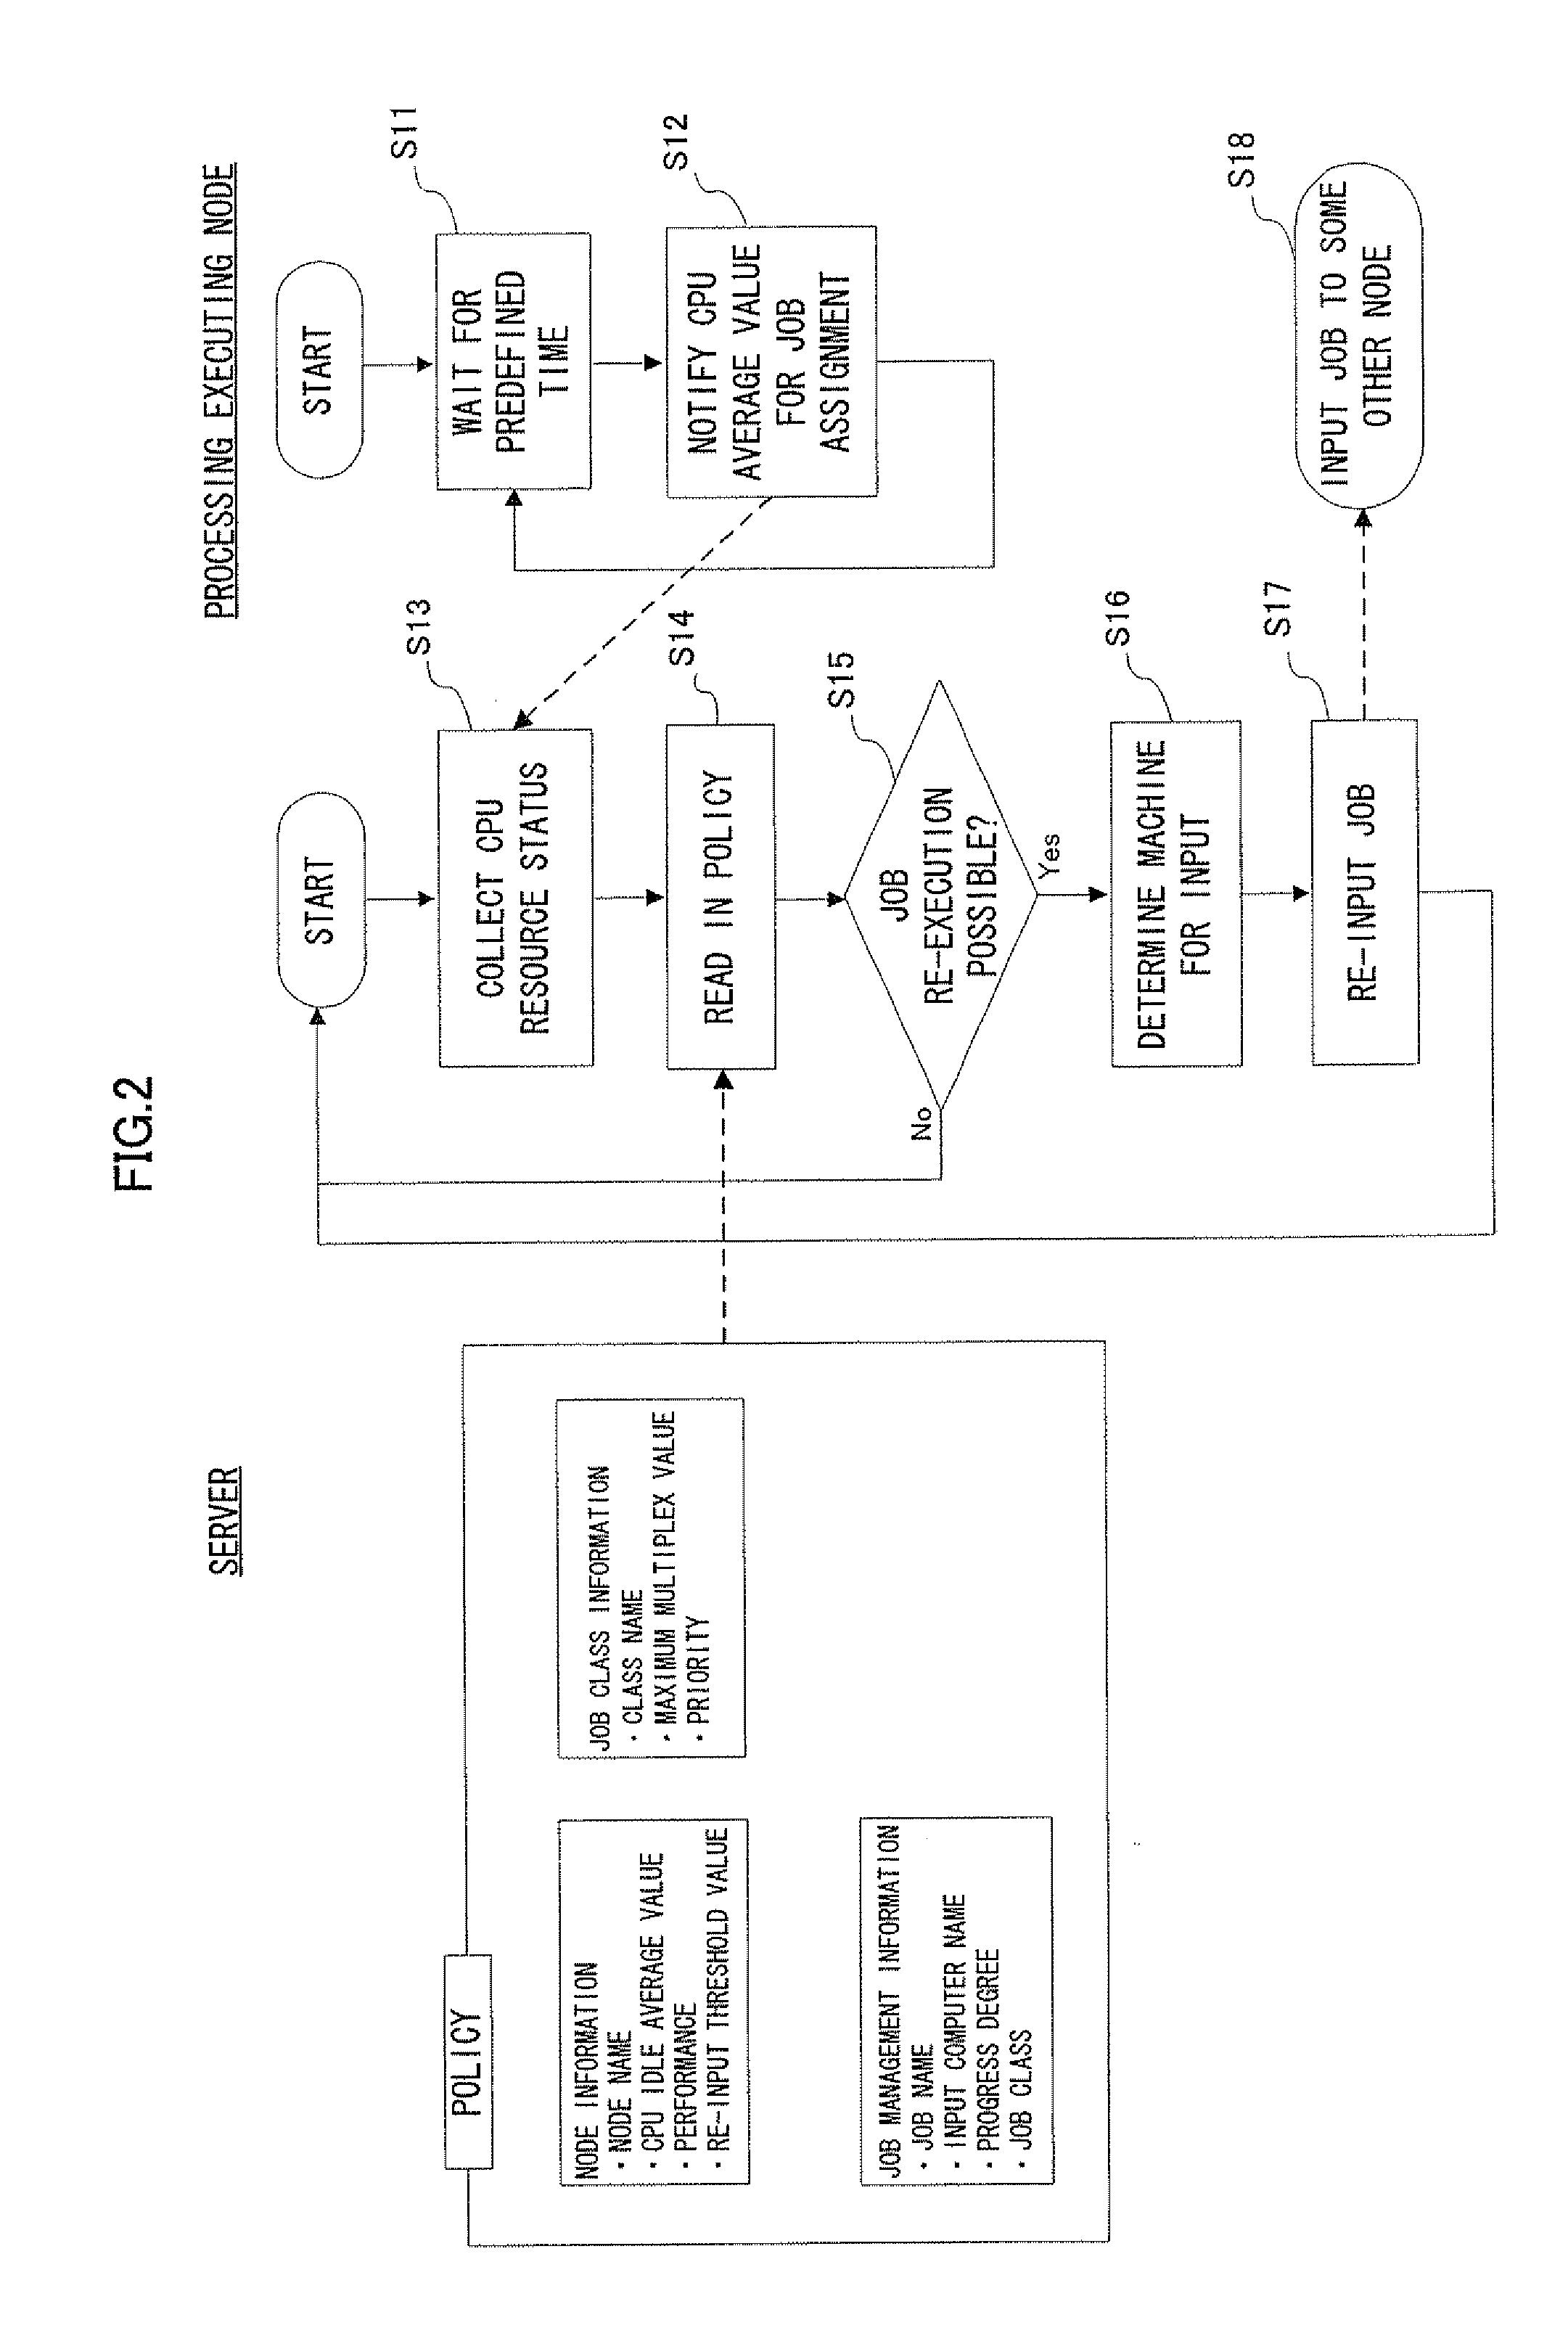 Distributed processing management apparatus, distributed processing management method and distributed processing management program